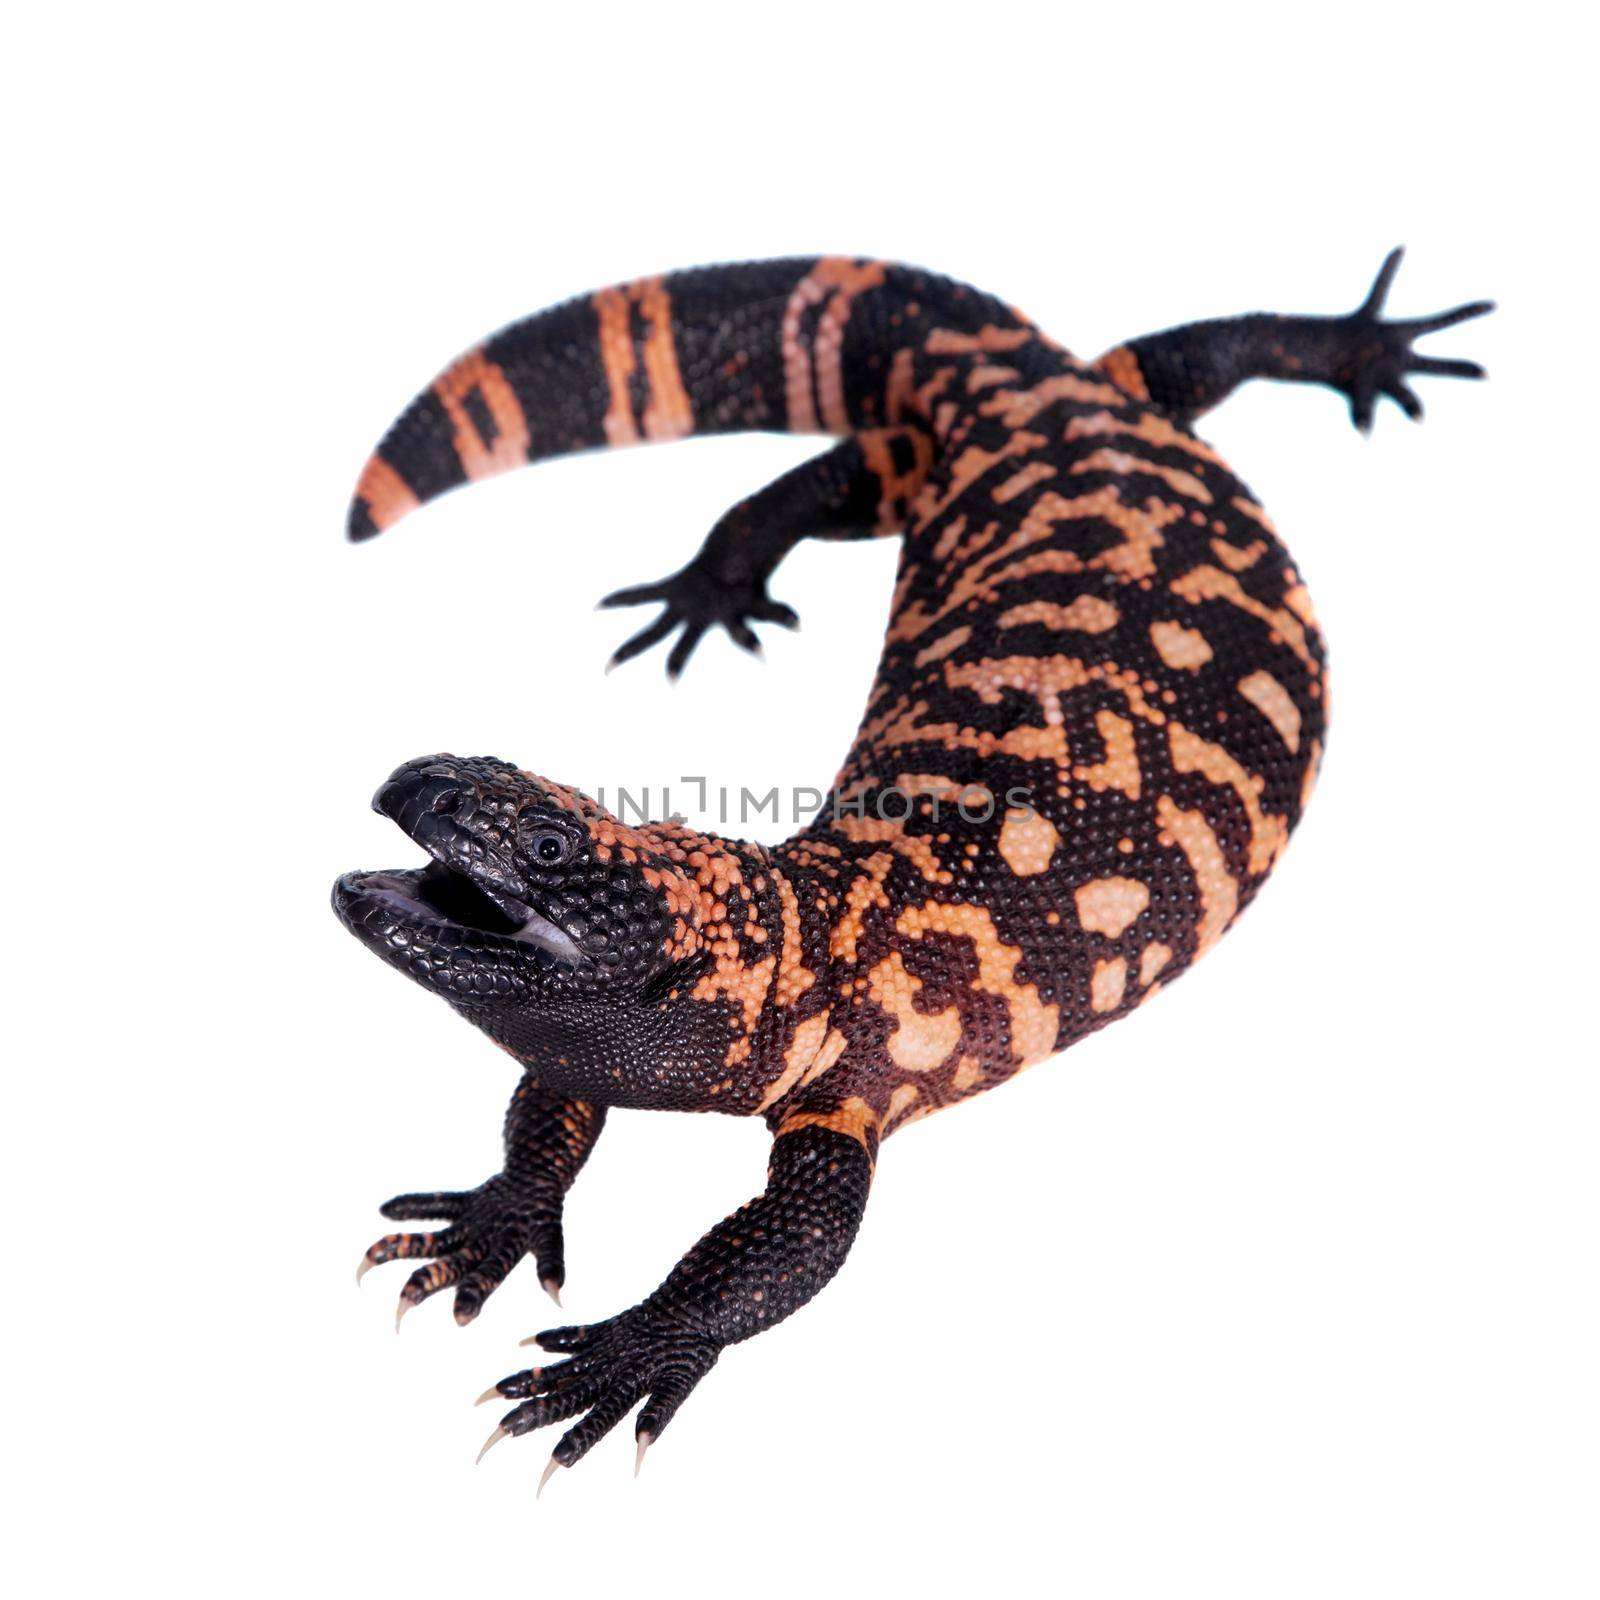 Gila Monster isolated on white by RosaJay